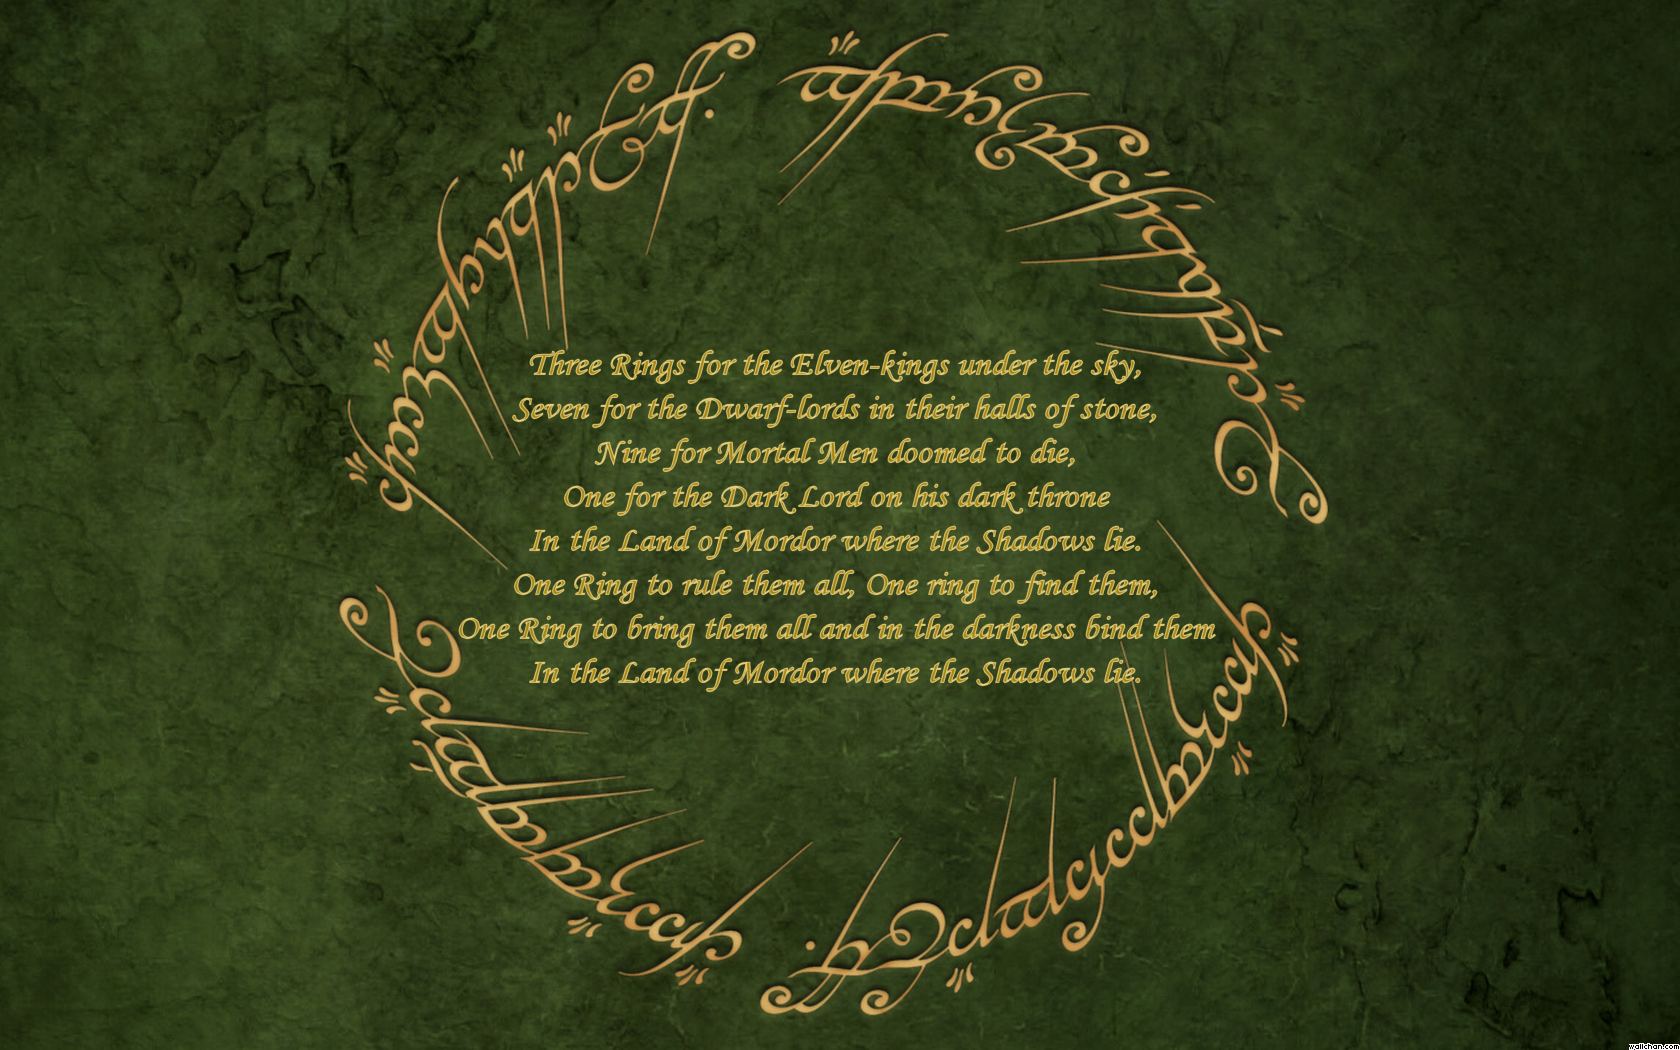 Lord of the Rings Photo: Lord of the Ring Quotes. Lotr quotes, Lord of the rings, Lotr